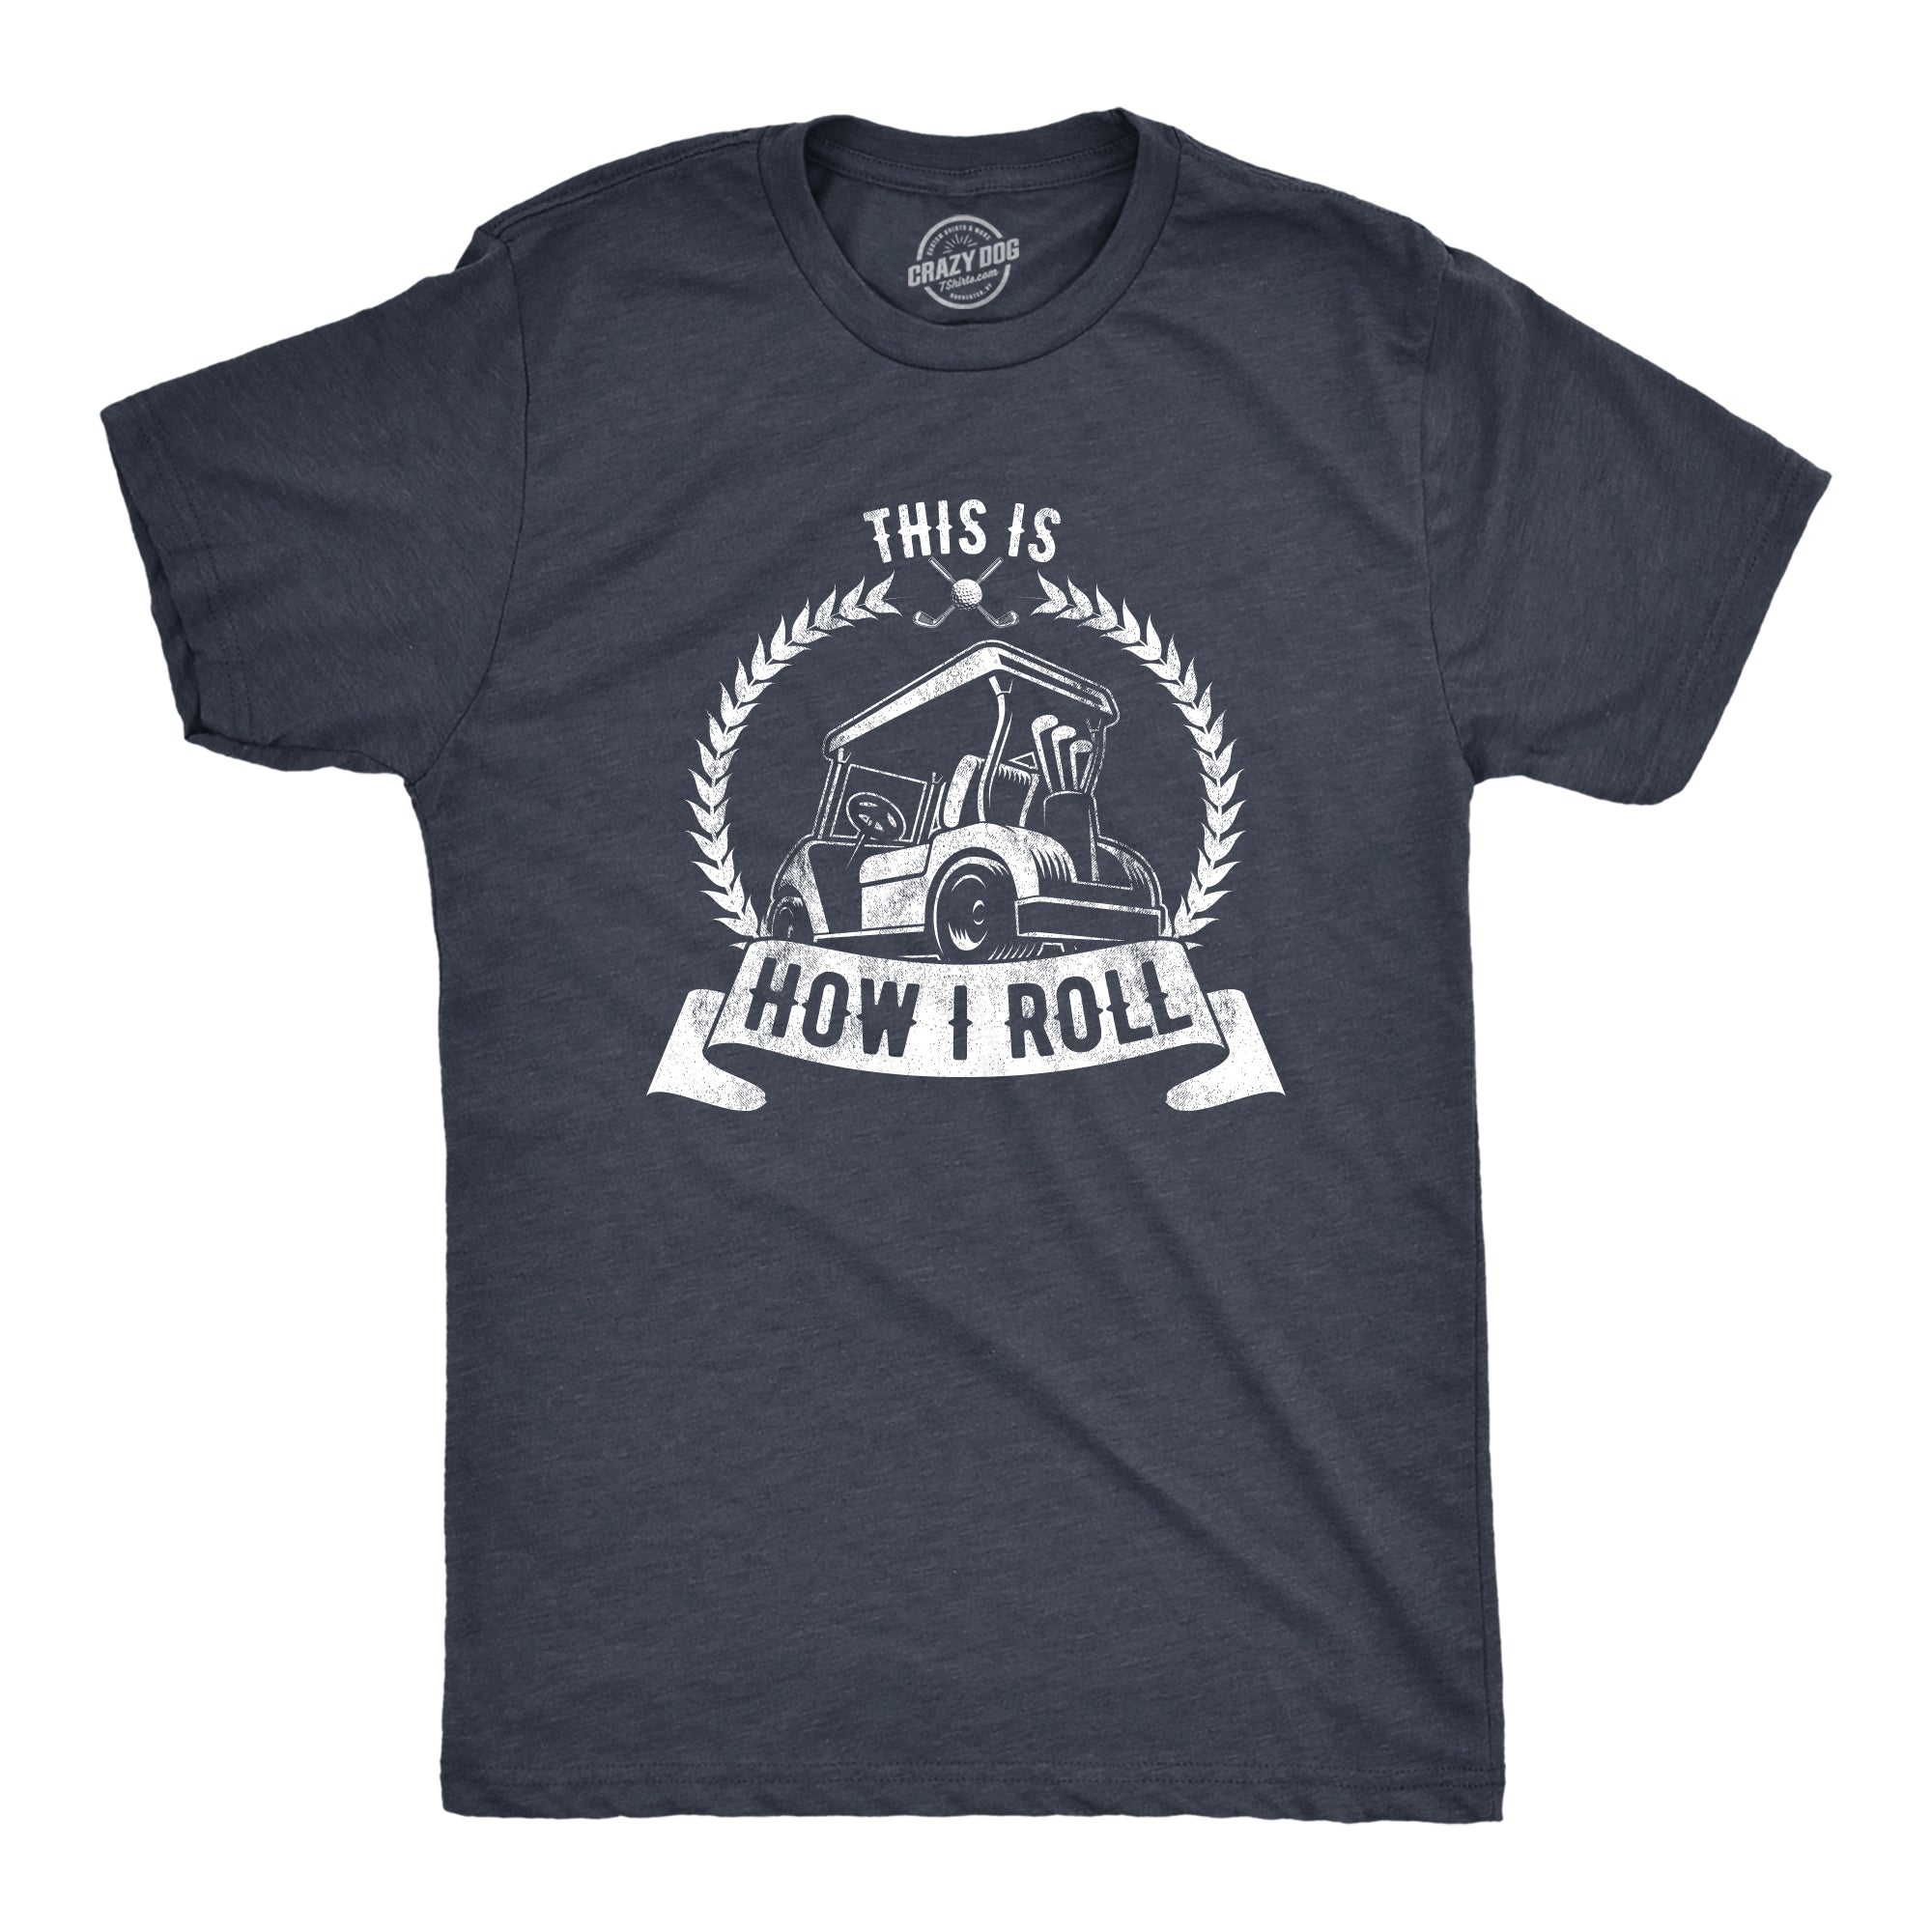 Funny Heather Navy - How I Roll This Is How I Roll Mens T Shirt Nerdy Father's Day Golf Tee